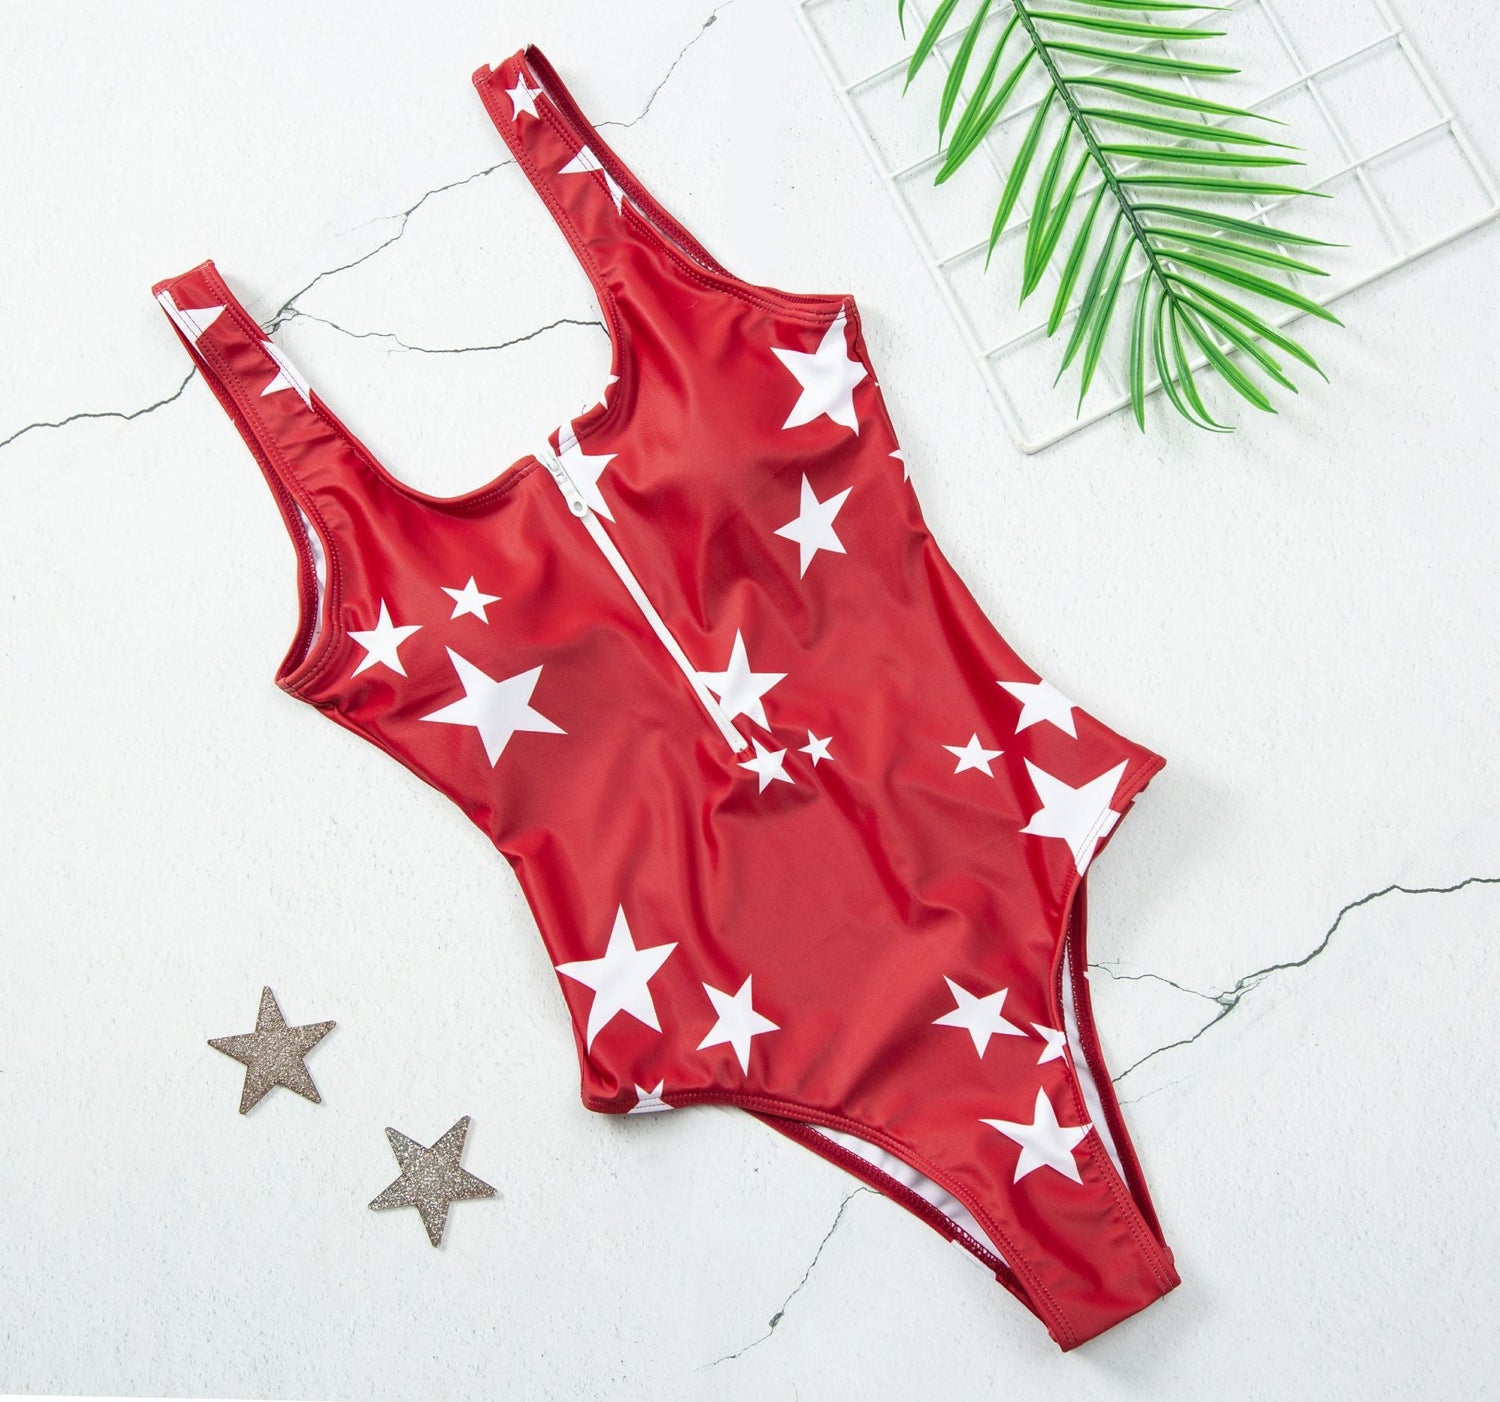 Navy Dreams New Red White Blue Striped Swimwear One Piece Zip Up Swimsuit Zipper Swimsuit  Sunset and Swim red star swimsuit S 